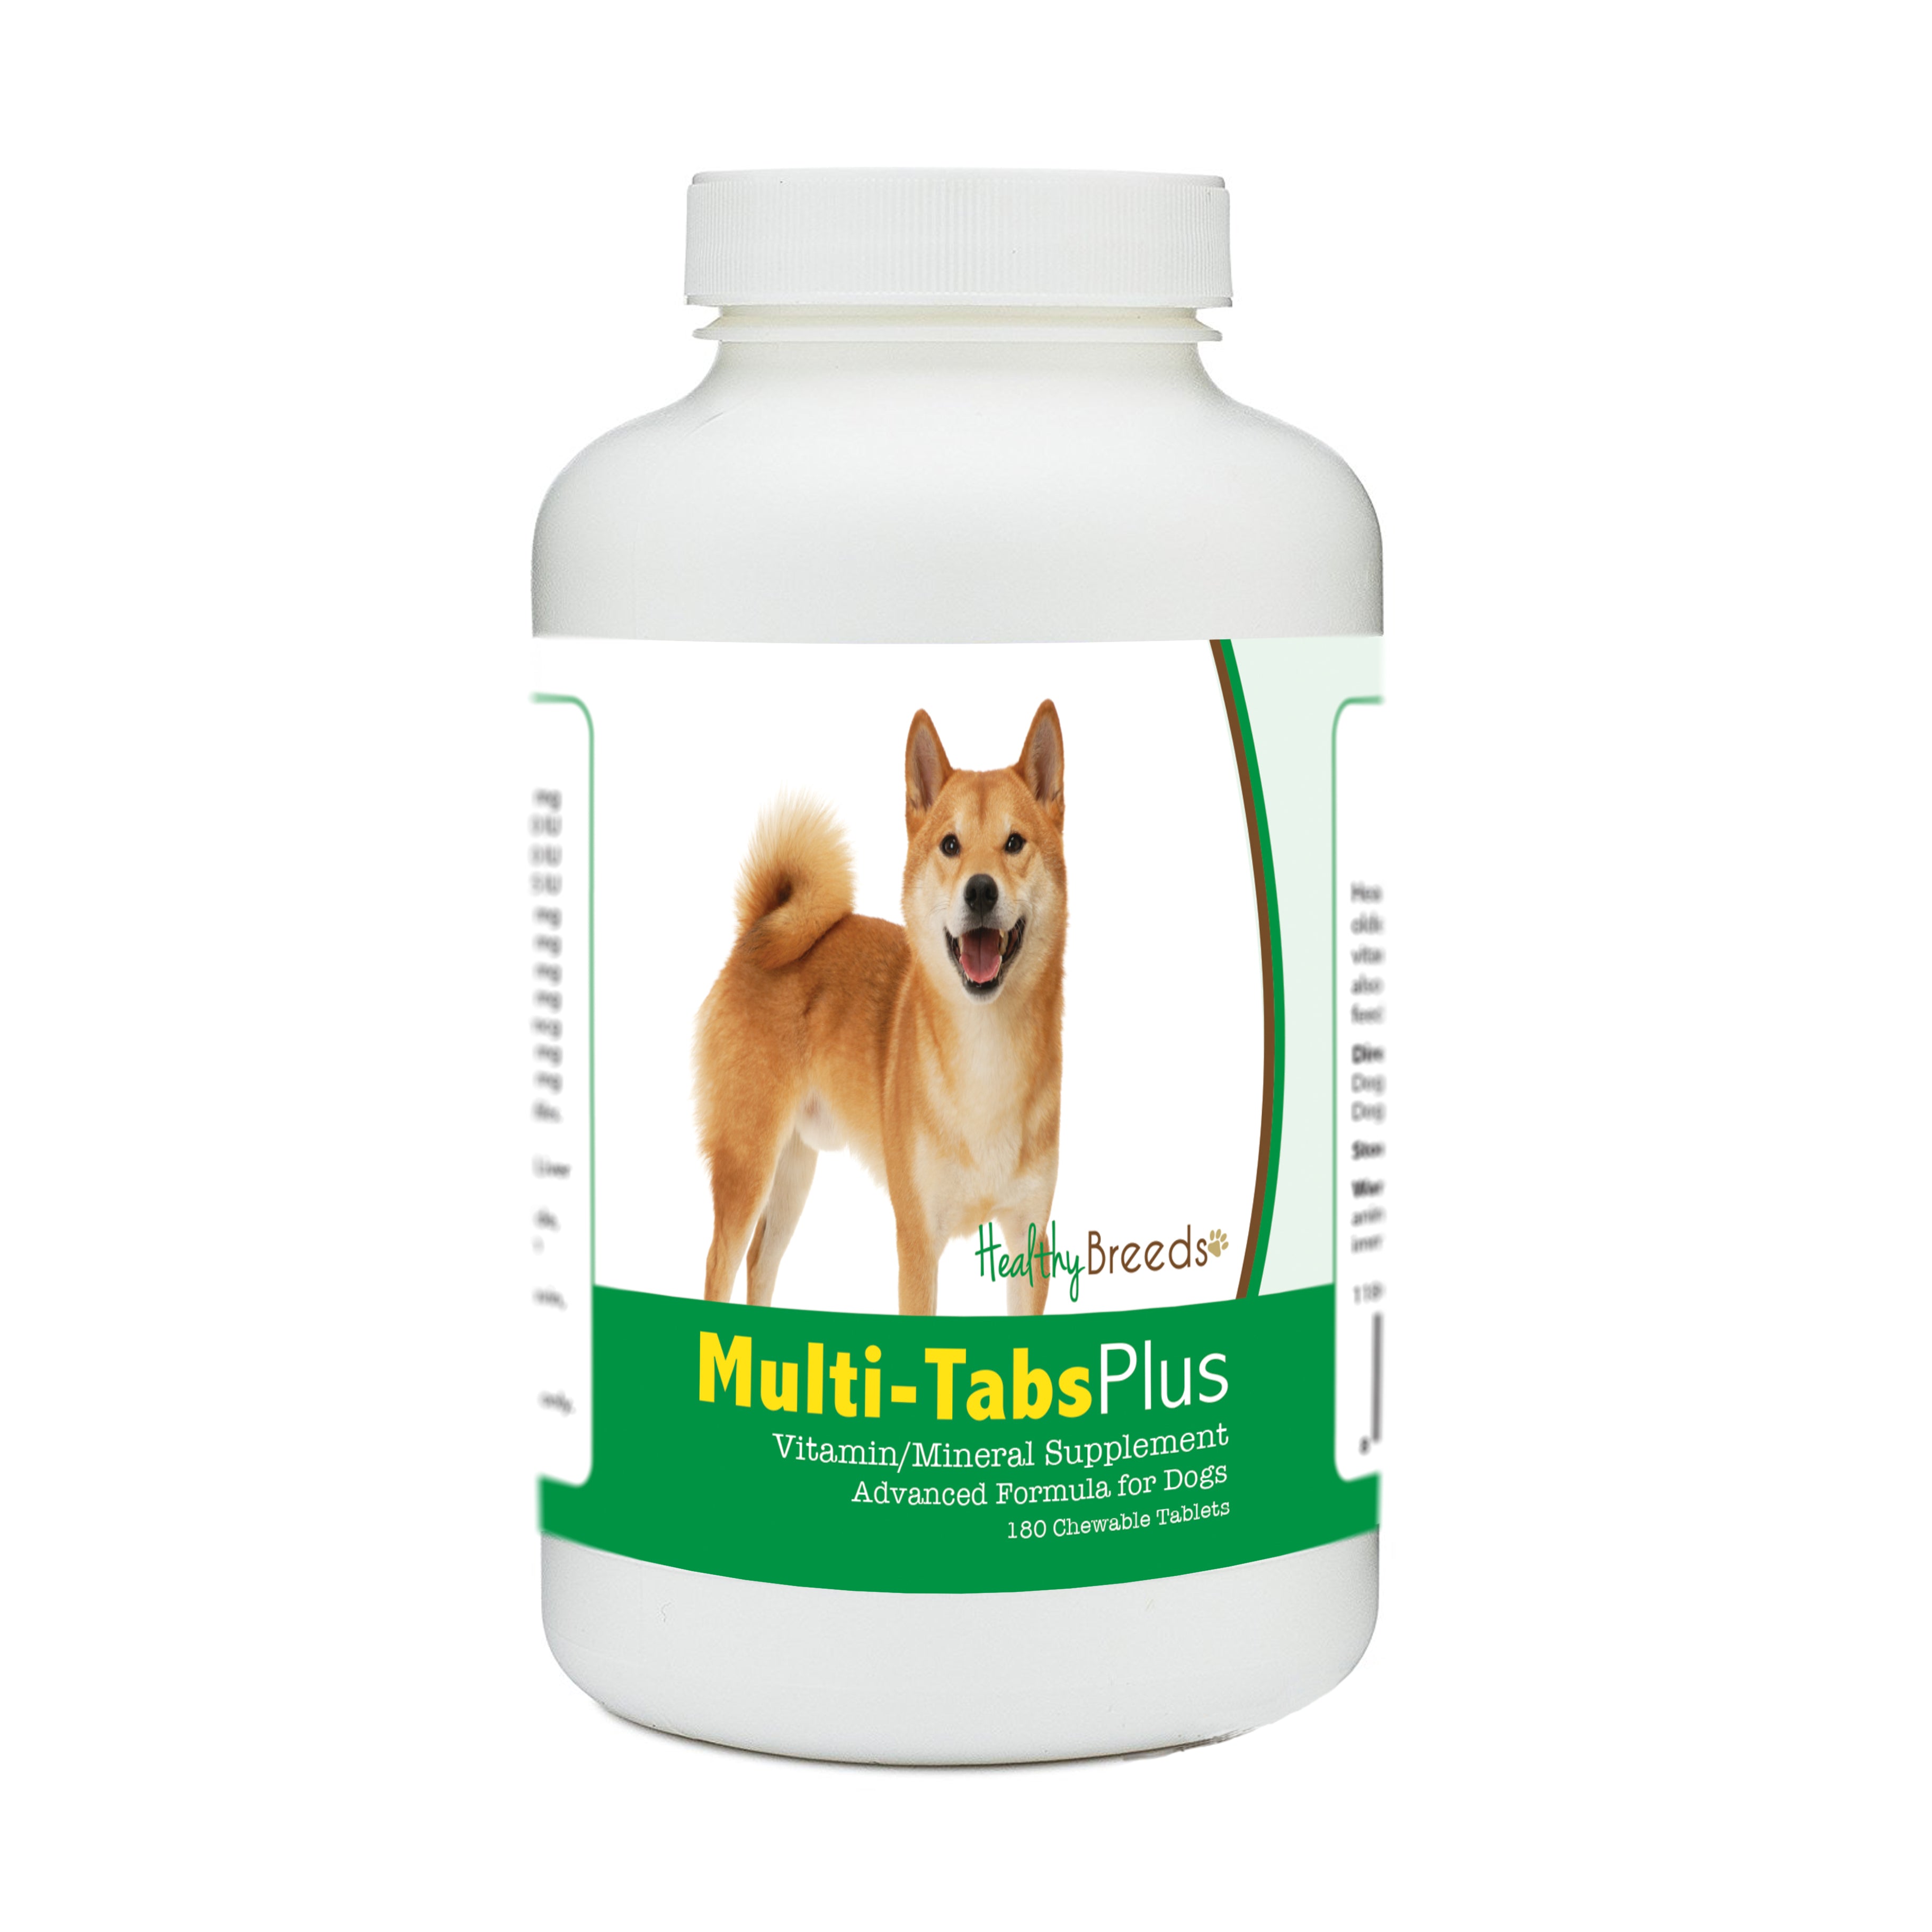 Shiba Inu Multi-Tabs Plus Chewable Tablets 180 Count